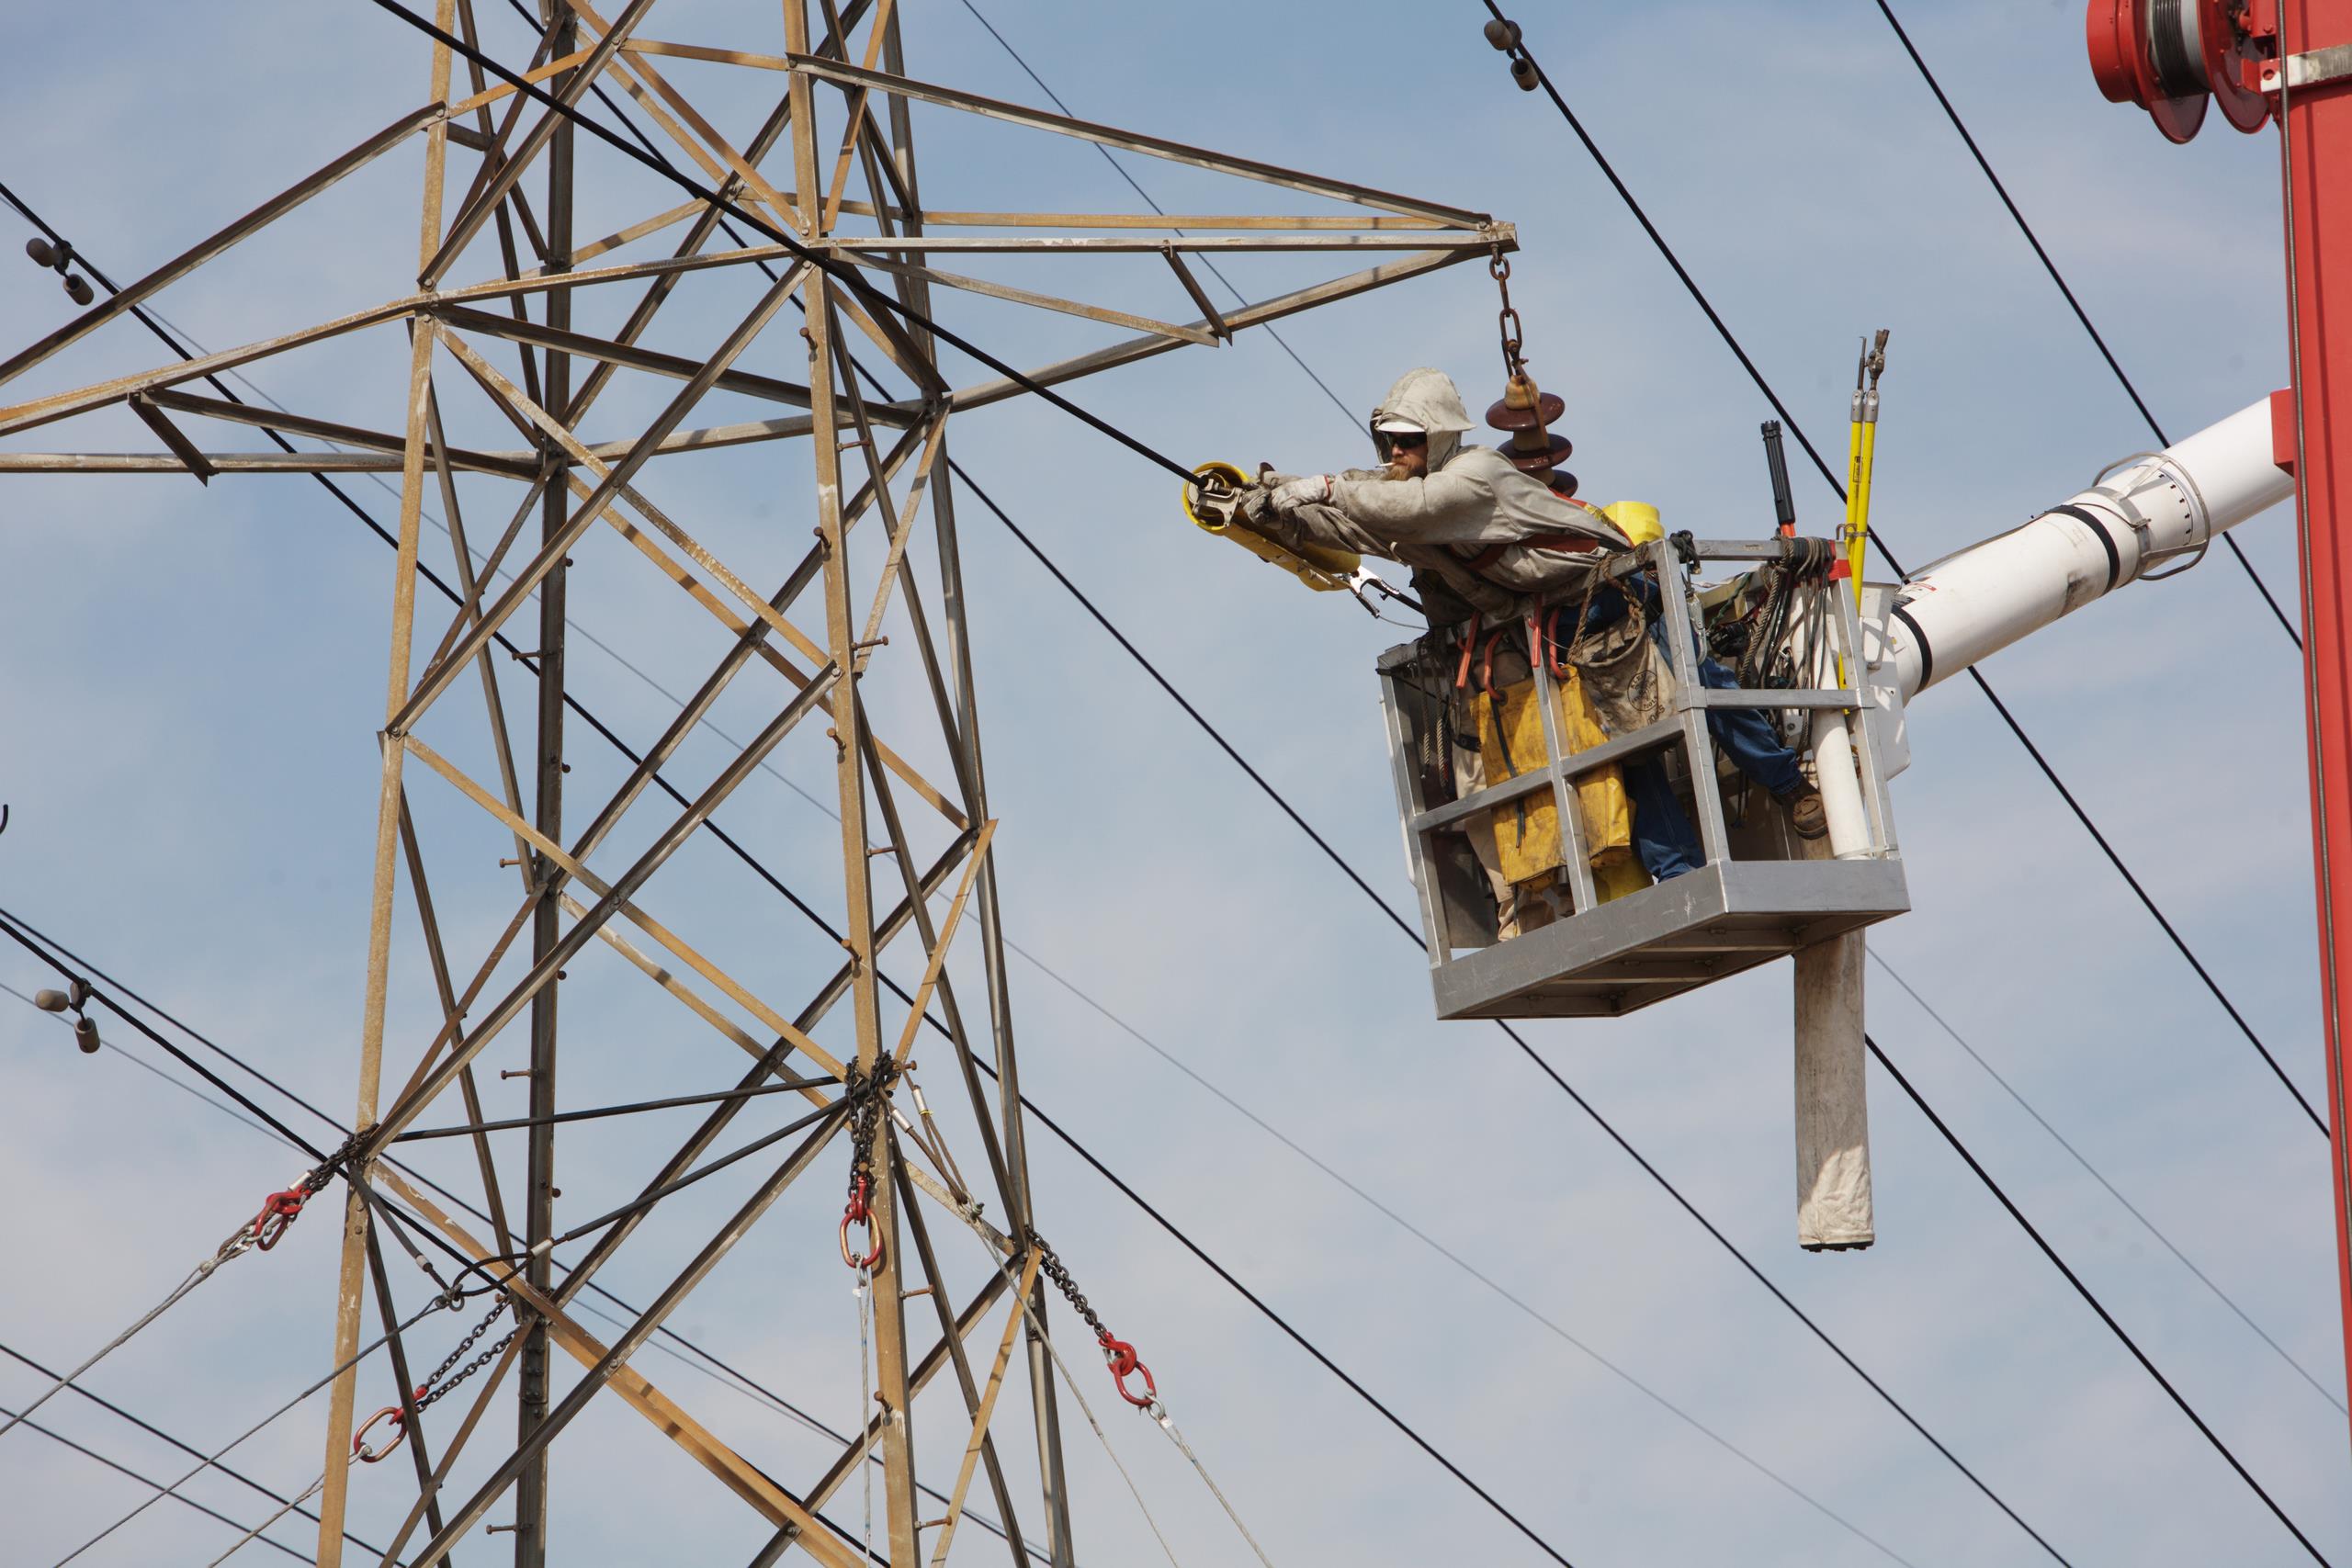 Operative working on transmission lines